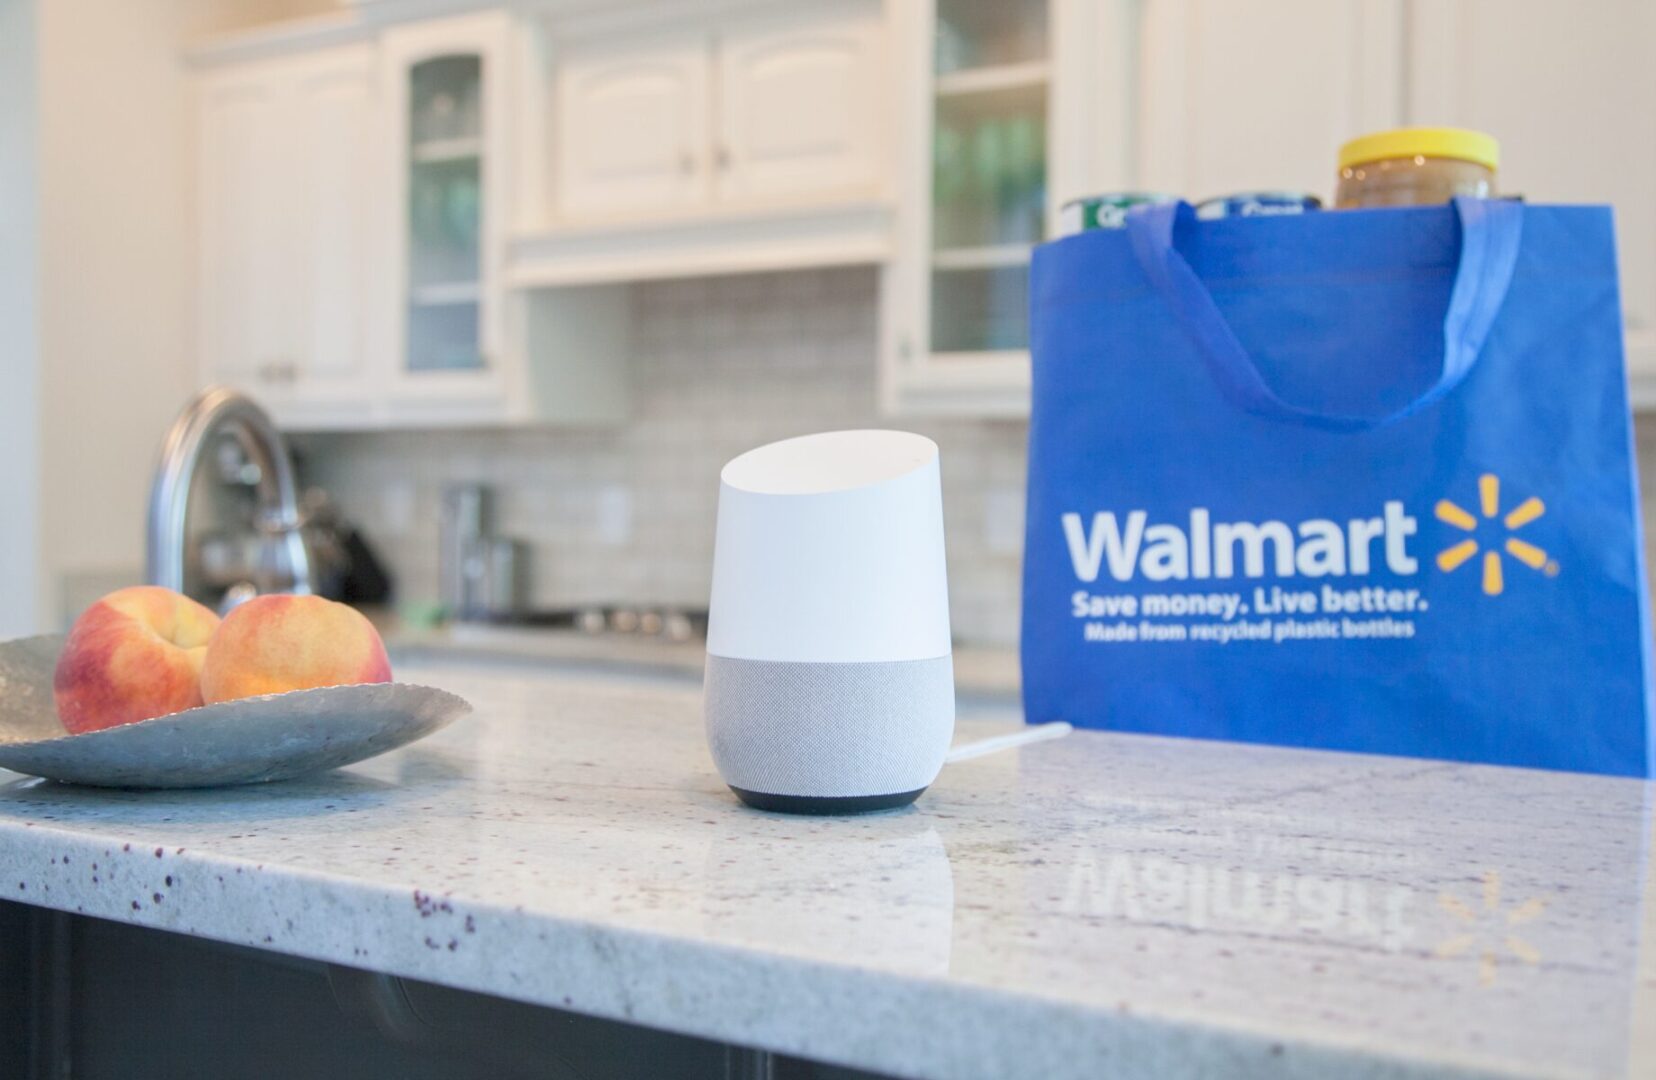 Walmart voice ordering with Google Assistant; a shopping innovation